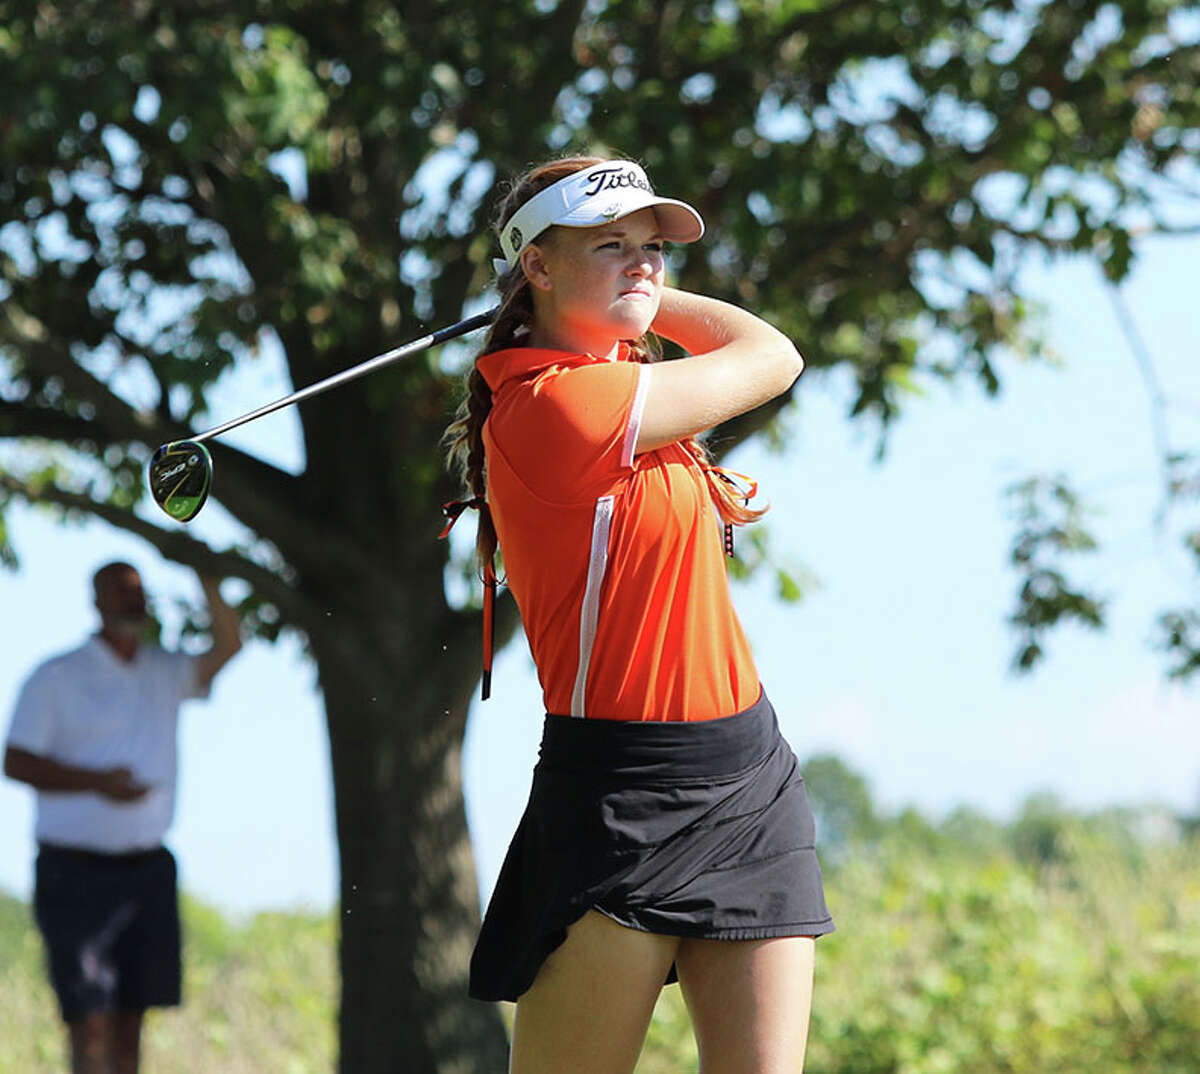 Waterloo's Reese Kite, shown last season in the Class 1A sectional at Acorns in Waterloo, shot even-par 72 Saturday at Eagle Springs to beat an elite field at the Illinois-Missouri River Challenge in St. Louis County/